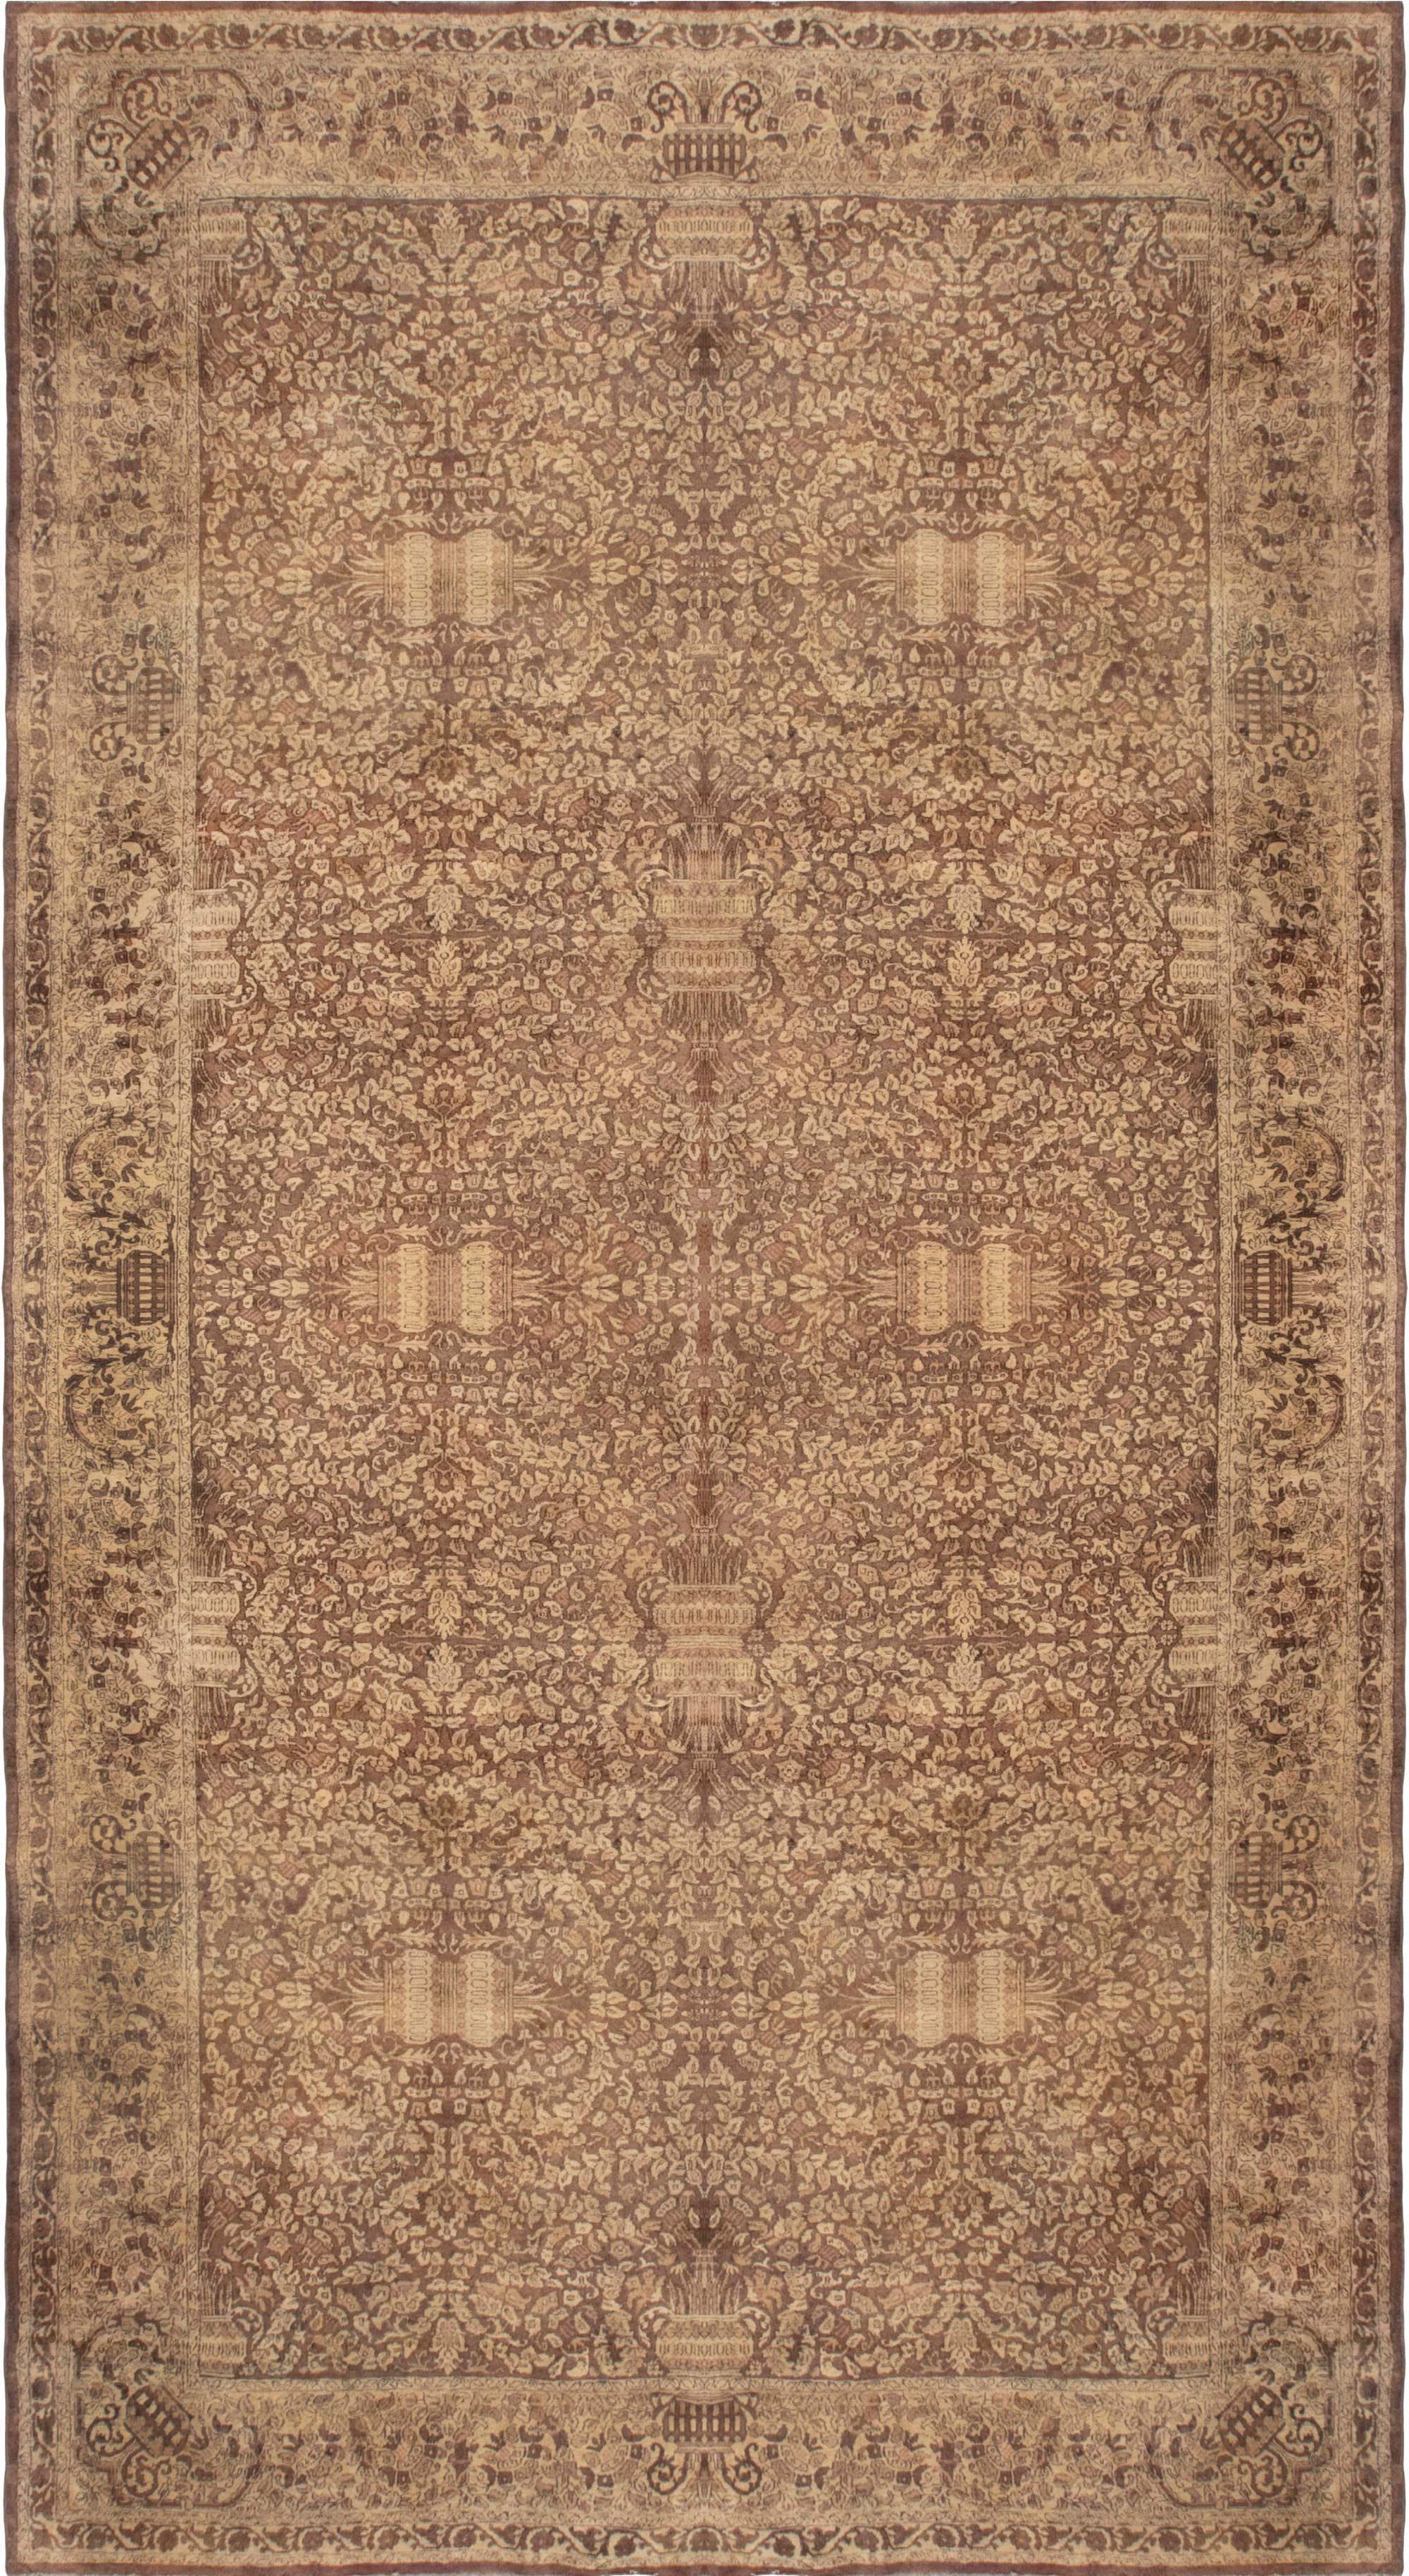 Antique Indian Amritsar Handmade Wool Rug For Sale